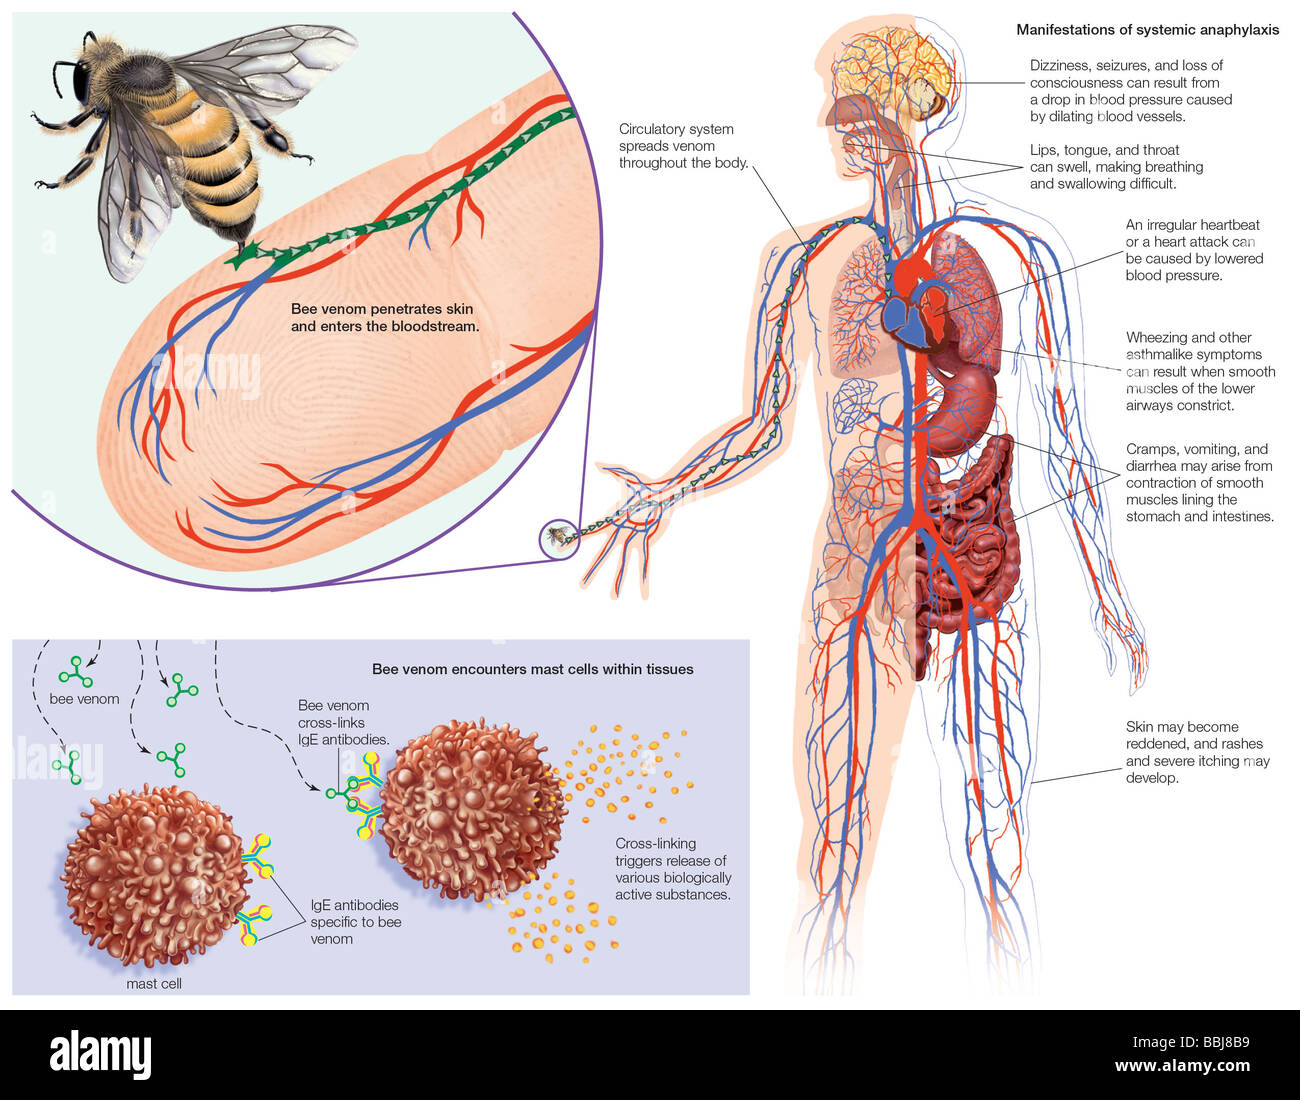 Systemic anaphylactic response to venom from a bee sting in an individual with type I hypersensitivity. Stock Photo